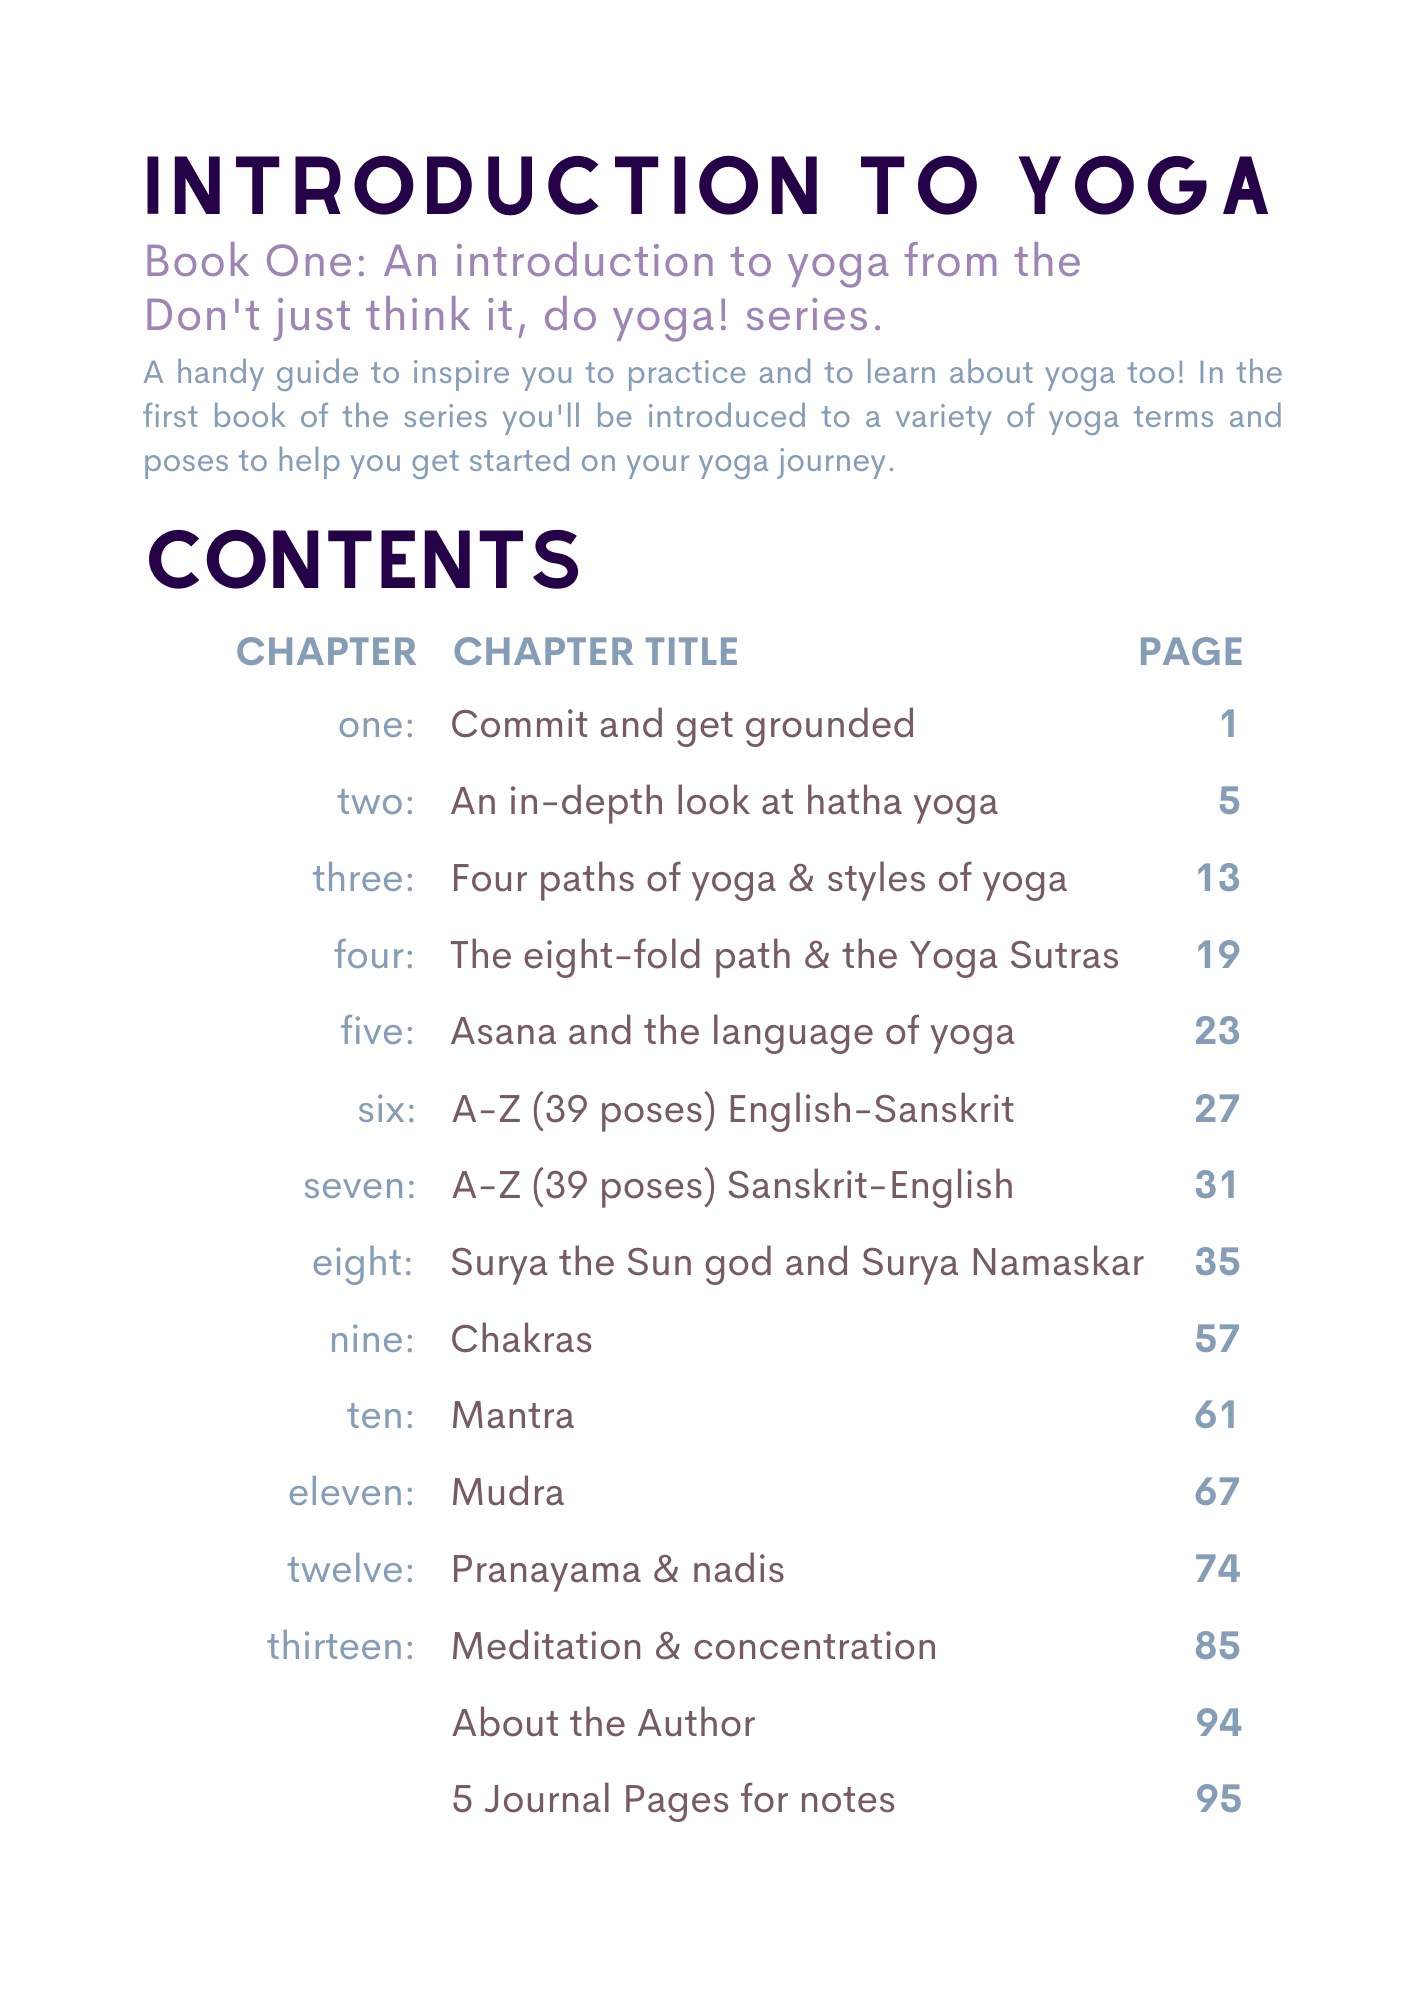 Don't just think it, do yoga book number one's contents from Introduction to Yoga by Amy Adams